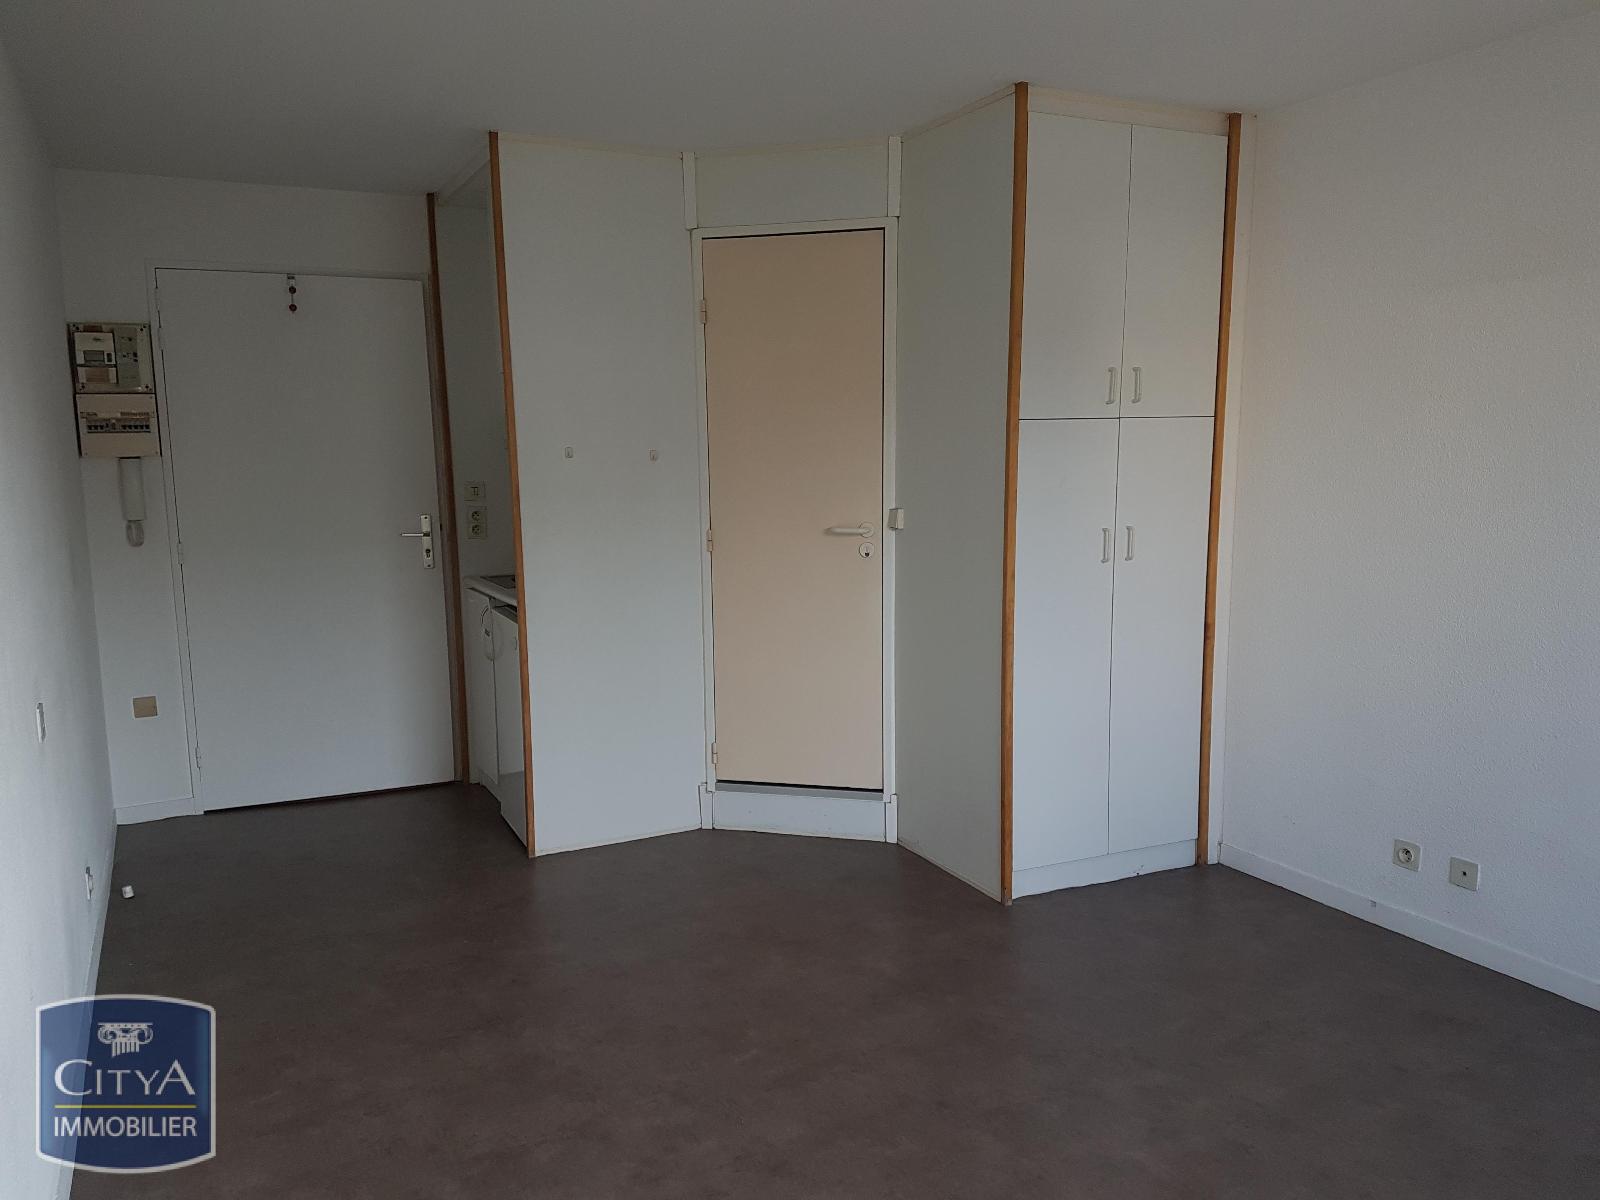 Appartement 1 pièce - 19m² - CHAMBERY